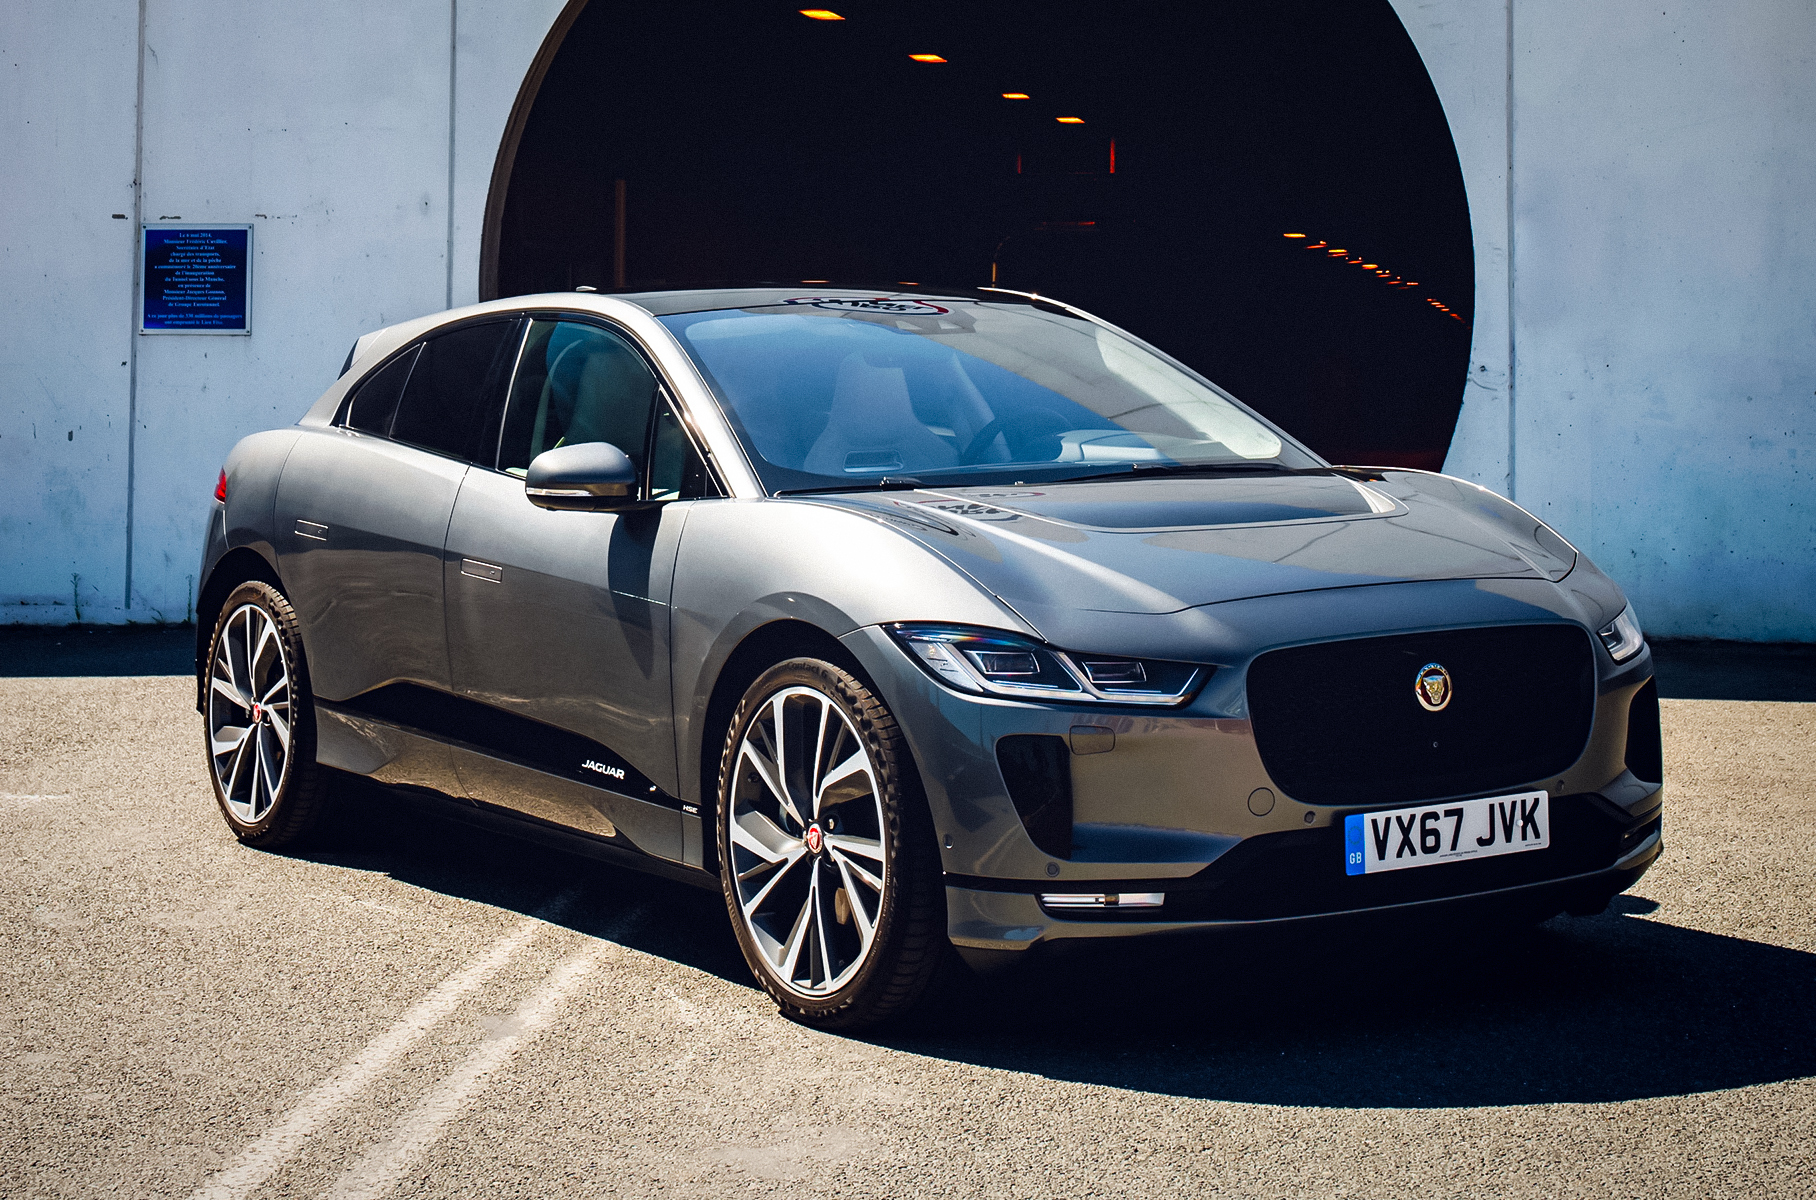 Jaguar to phase out I-Pace electric crossover